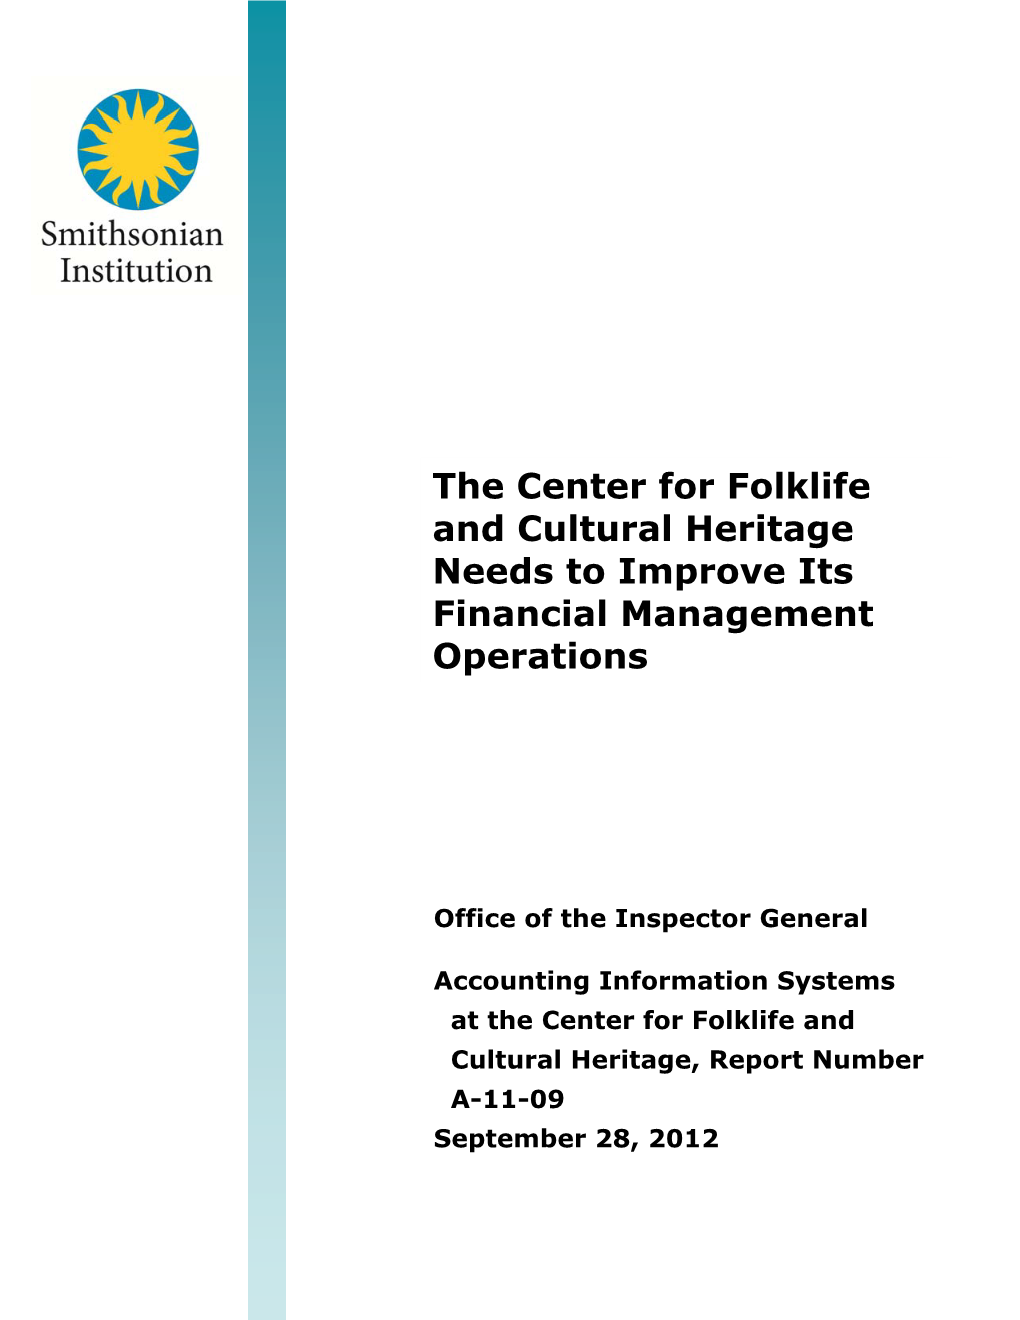 The Center for Folklife and Cultural Heritage Needs to Improve Its Financial Management Operations